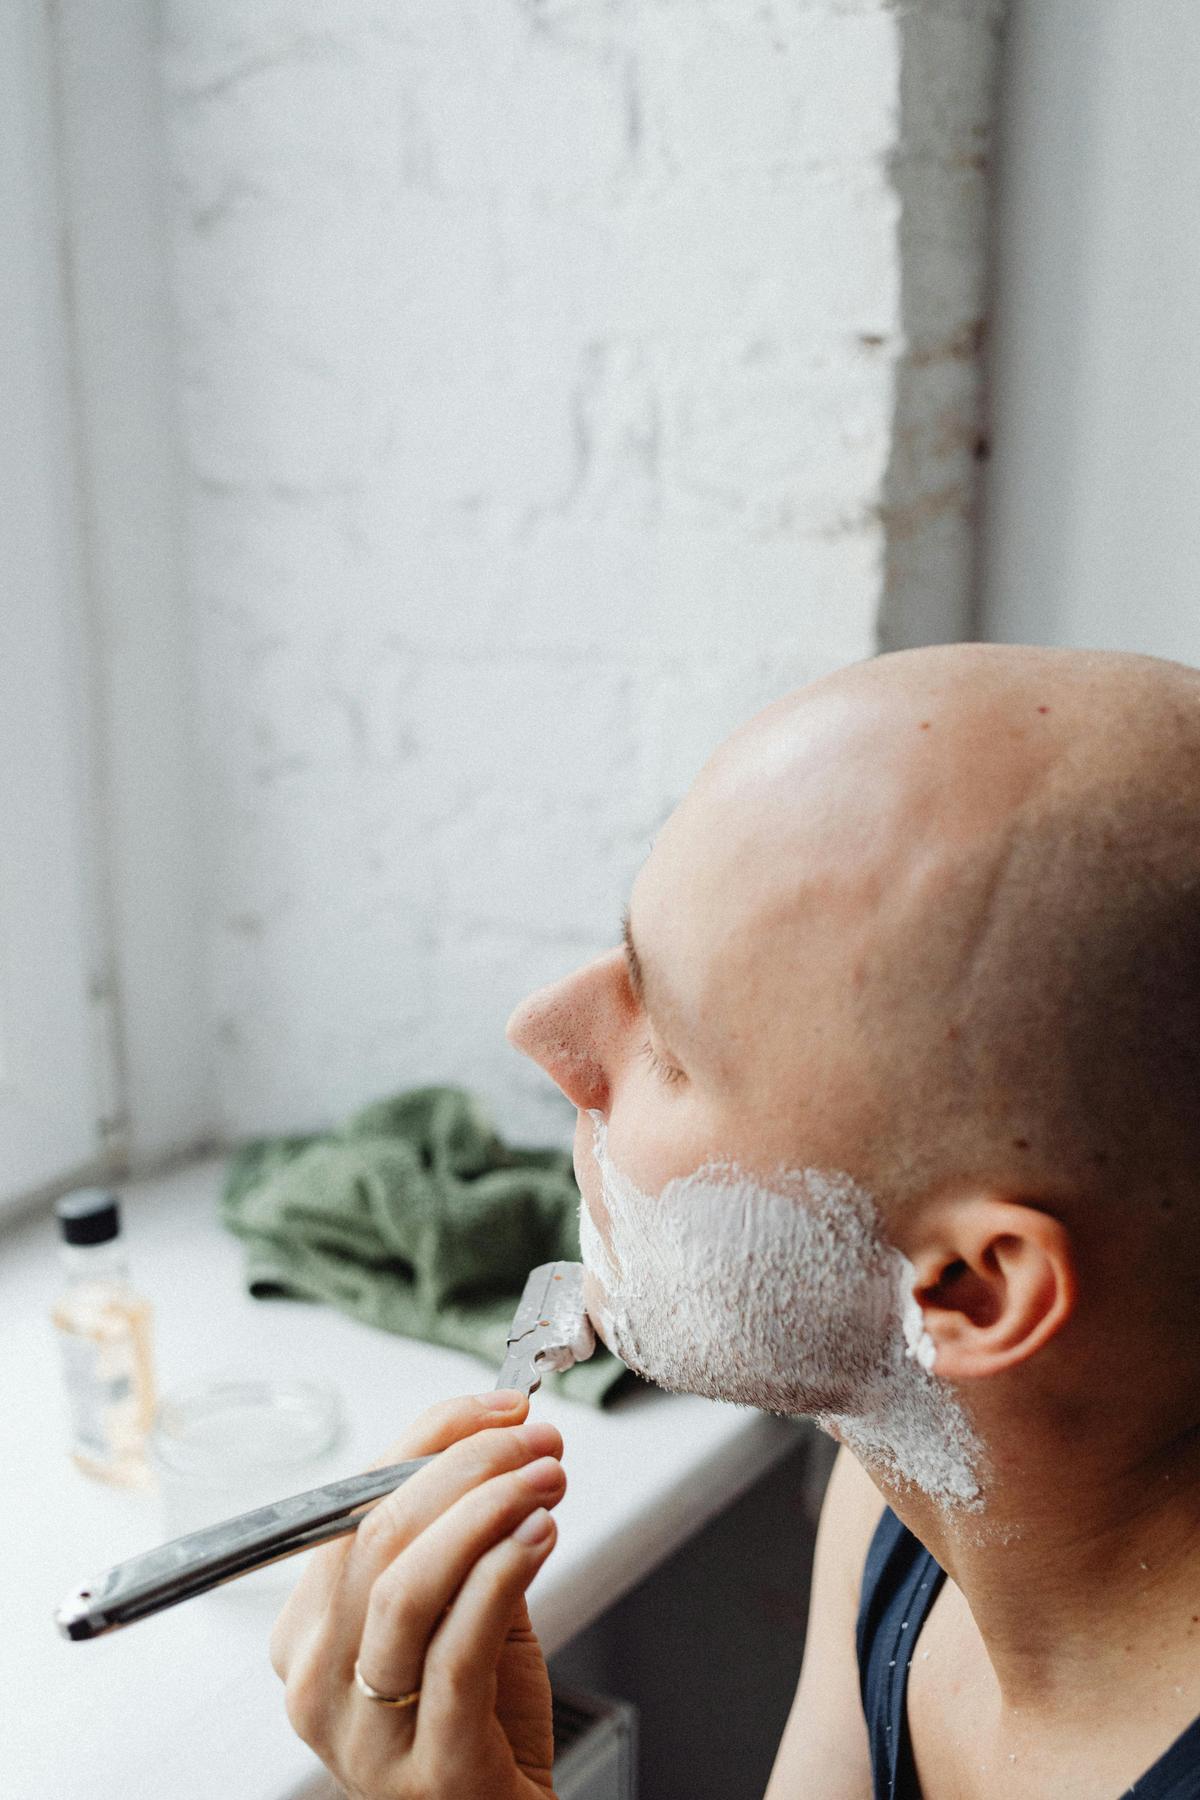 The idea of using a straight razor can at first be daunting, but it is a technique that millions have used for a safe, irritation-free shave. (Karolina Grabowska/Pexels)